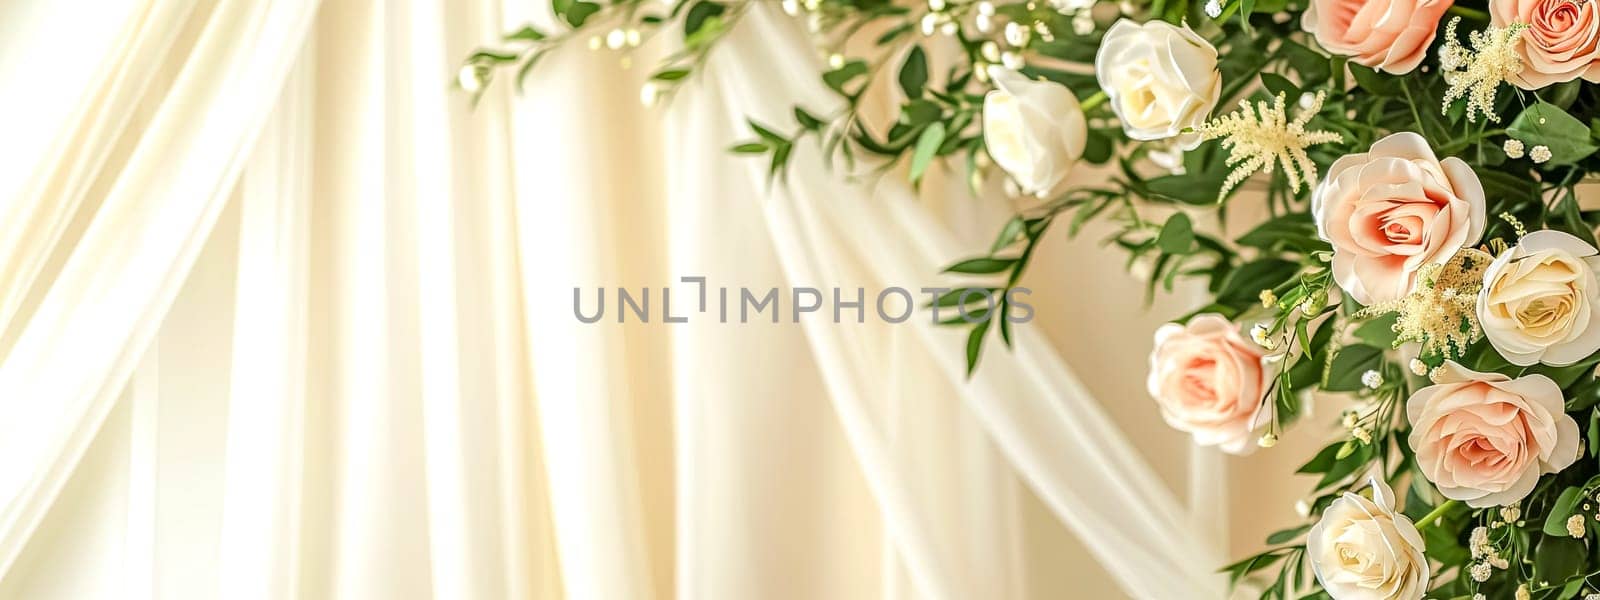 Elegant wedding backdrop featuring a cascade of creamy white and blush roses intertwined with delicate greenery and soft, flowing ivory drapery, creating a romantic and sophisticated setting.